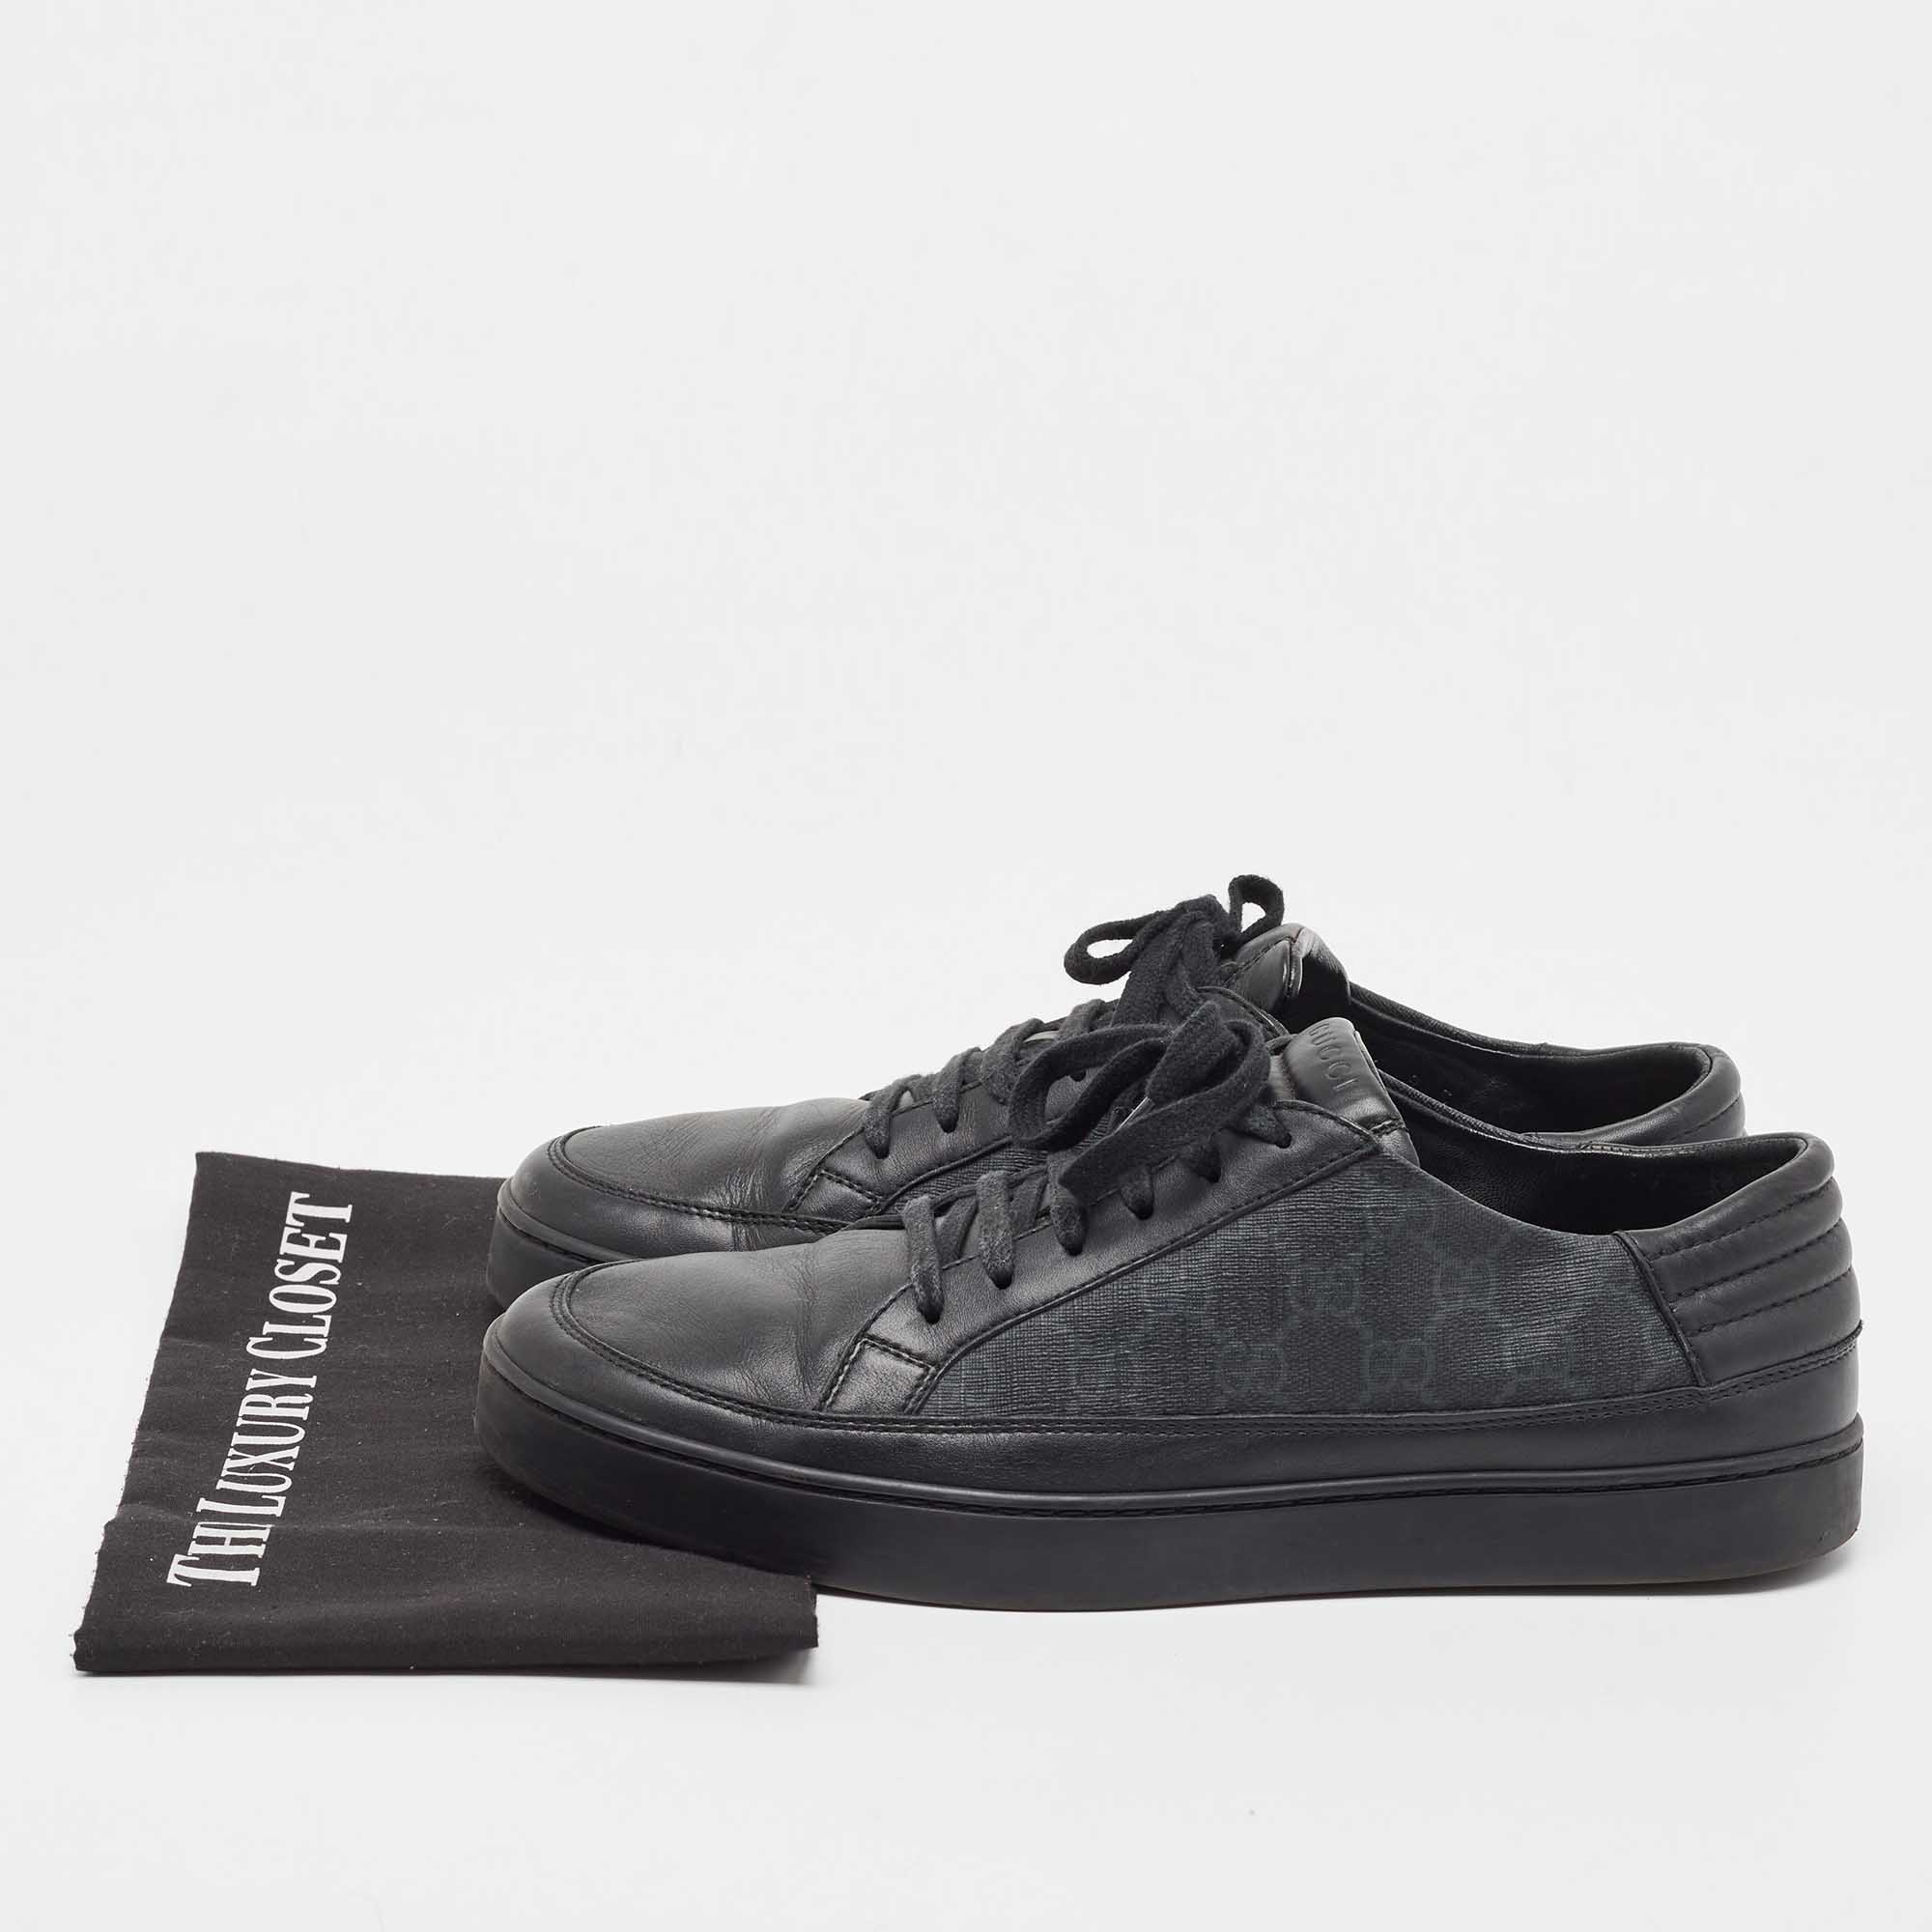 Gucci Black Leather And GG Supreme Canvas Low Top Sneakers Size 43